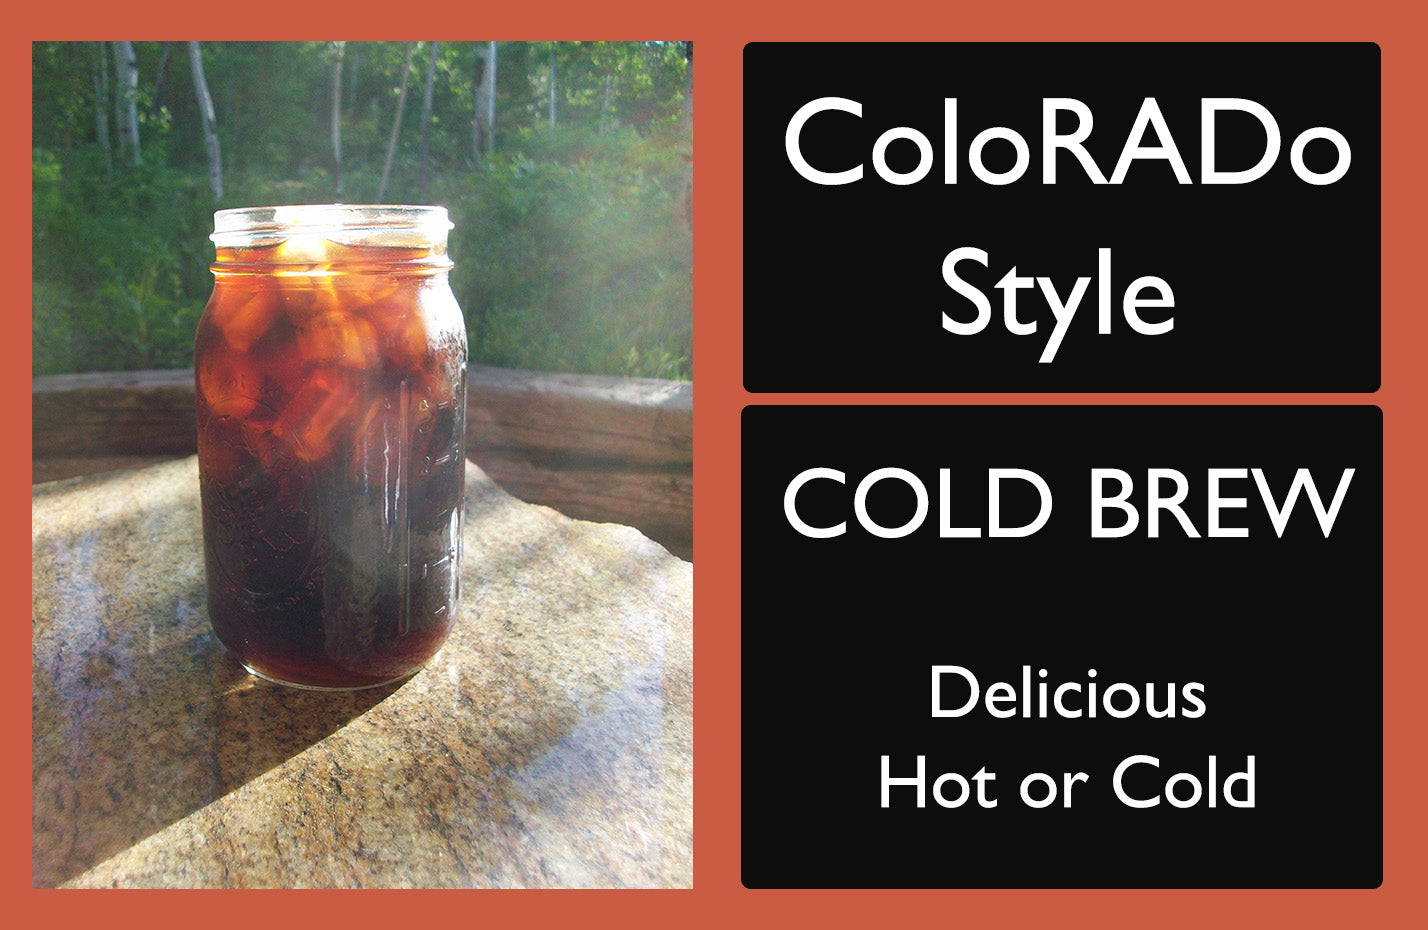 Picture of a bag of Colorado Style Cold Brew Coffee